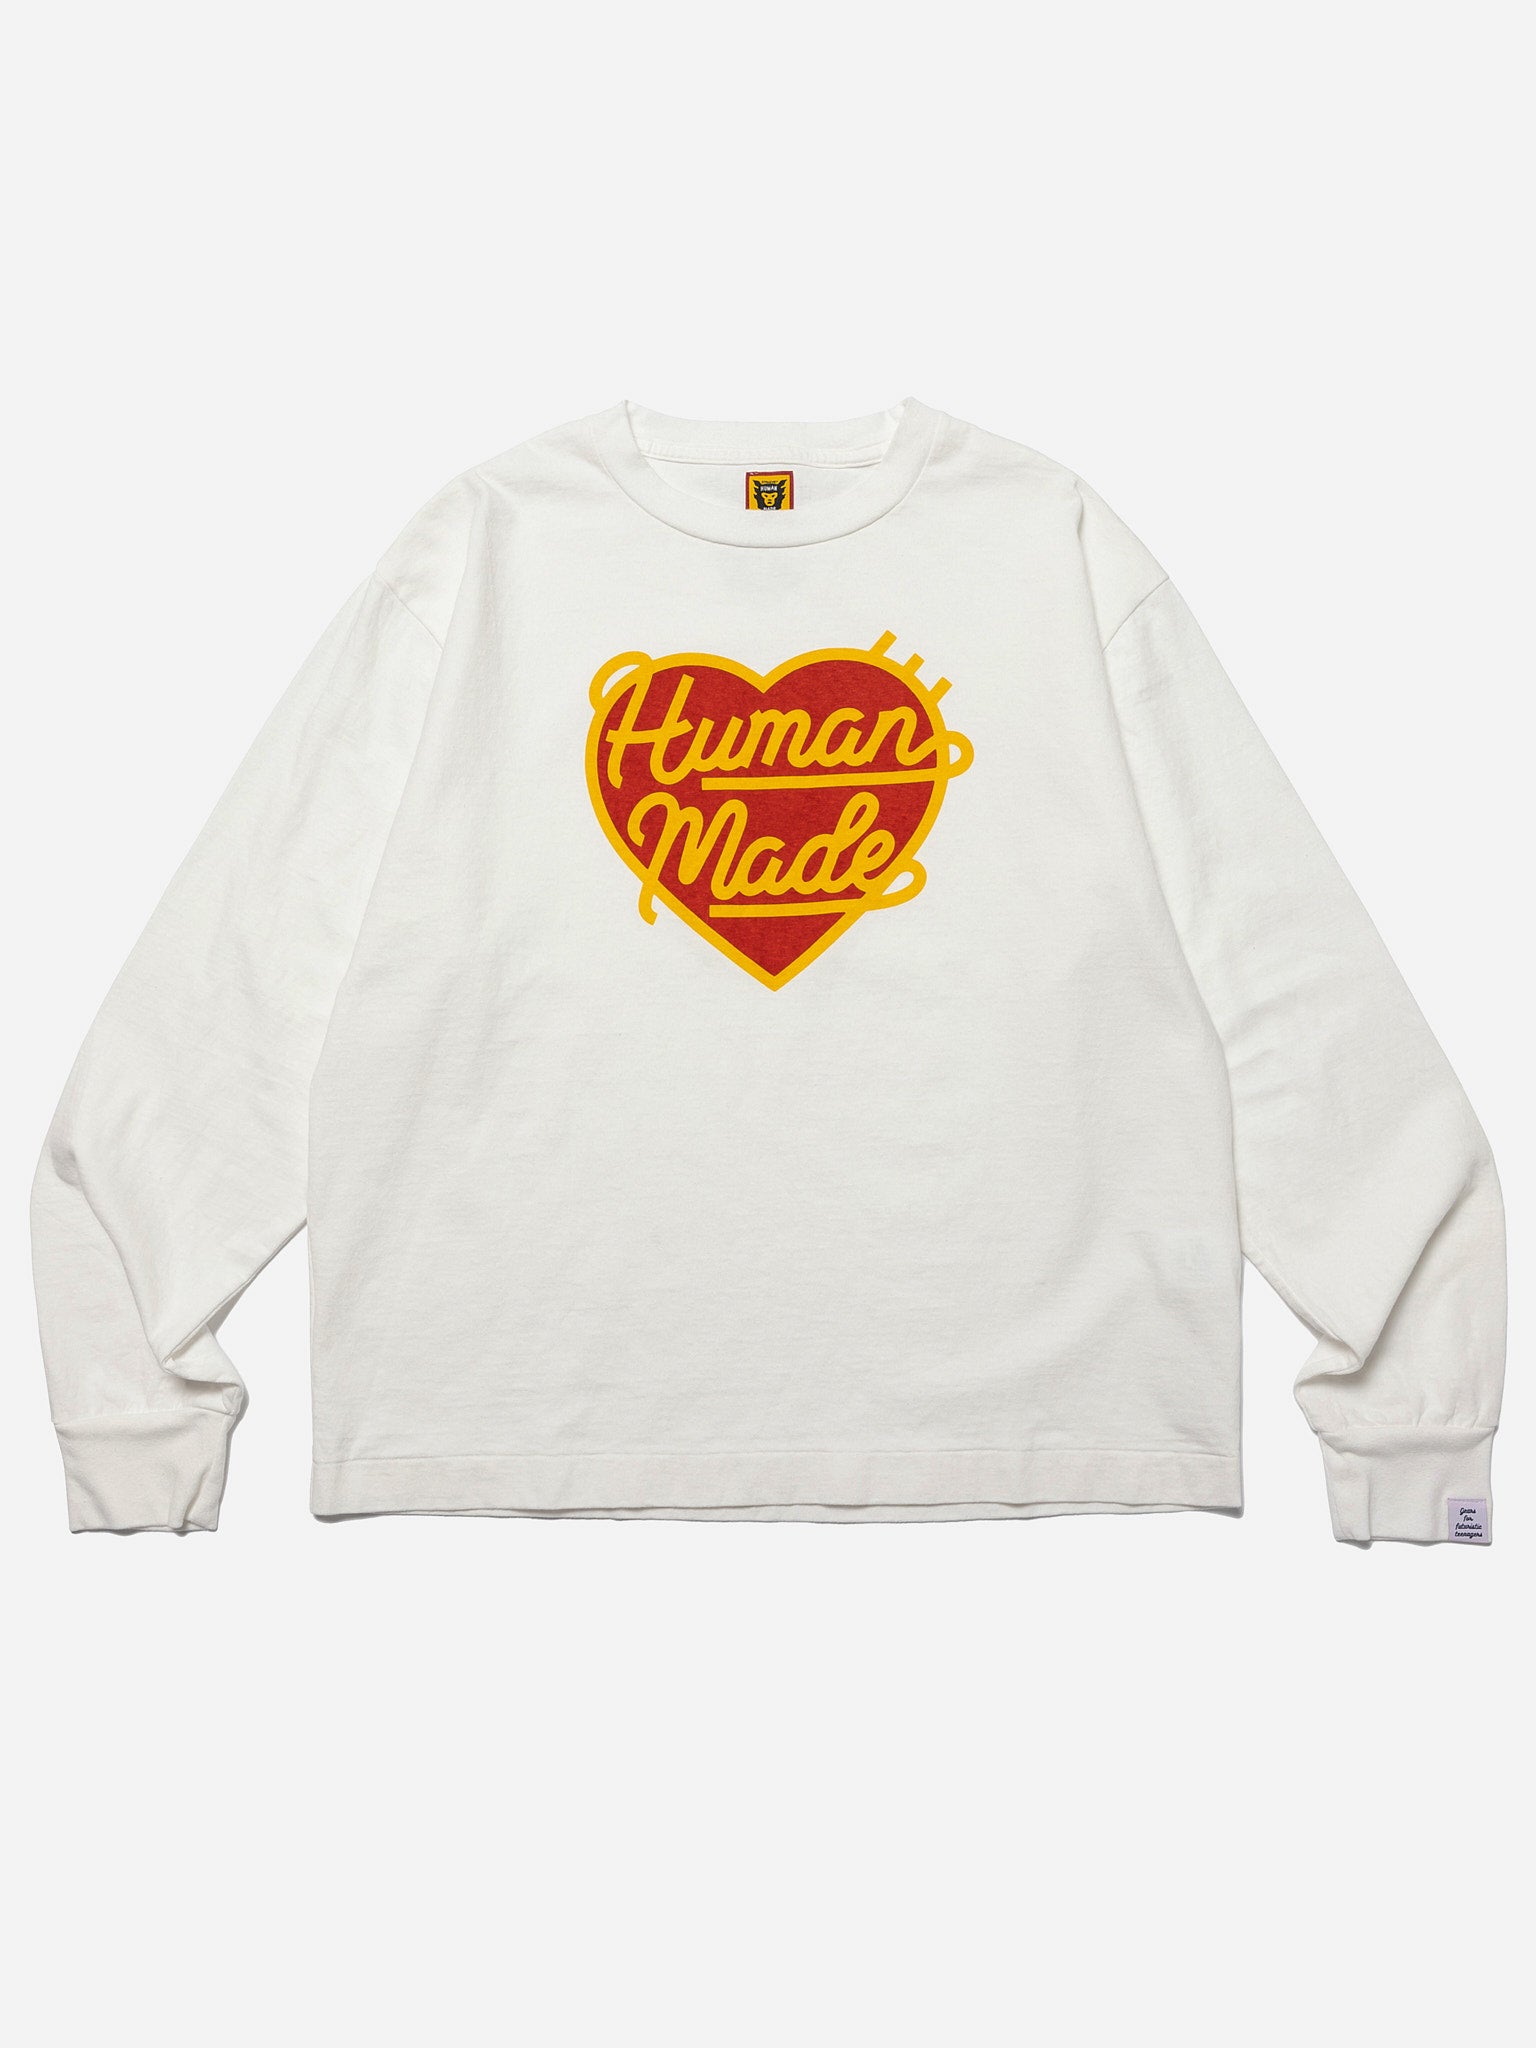 Human Made Graphic L/S T-Shirt #4